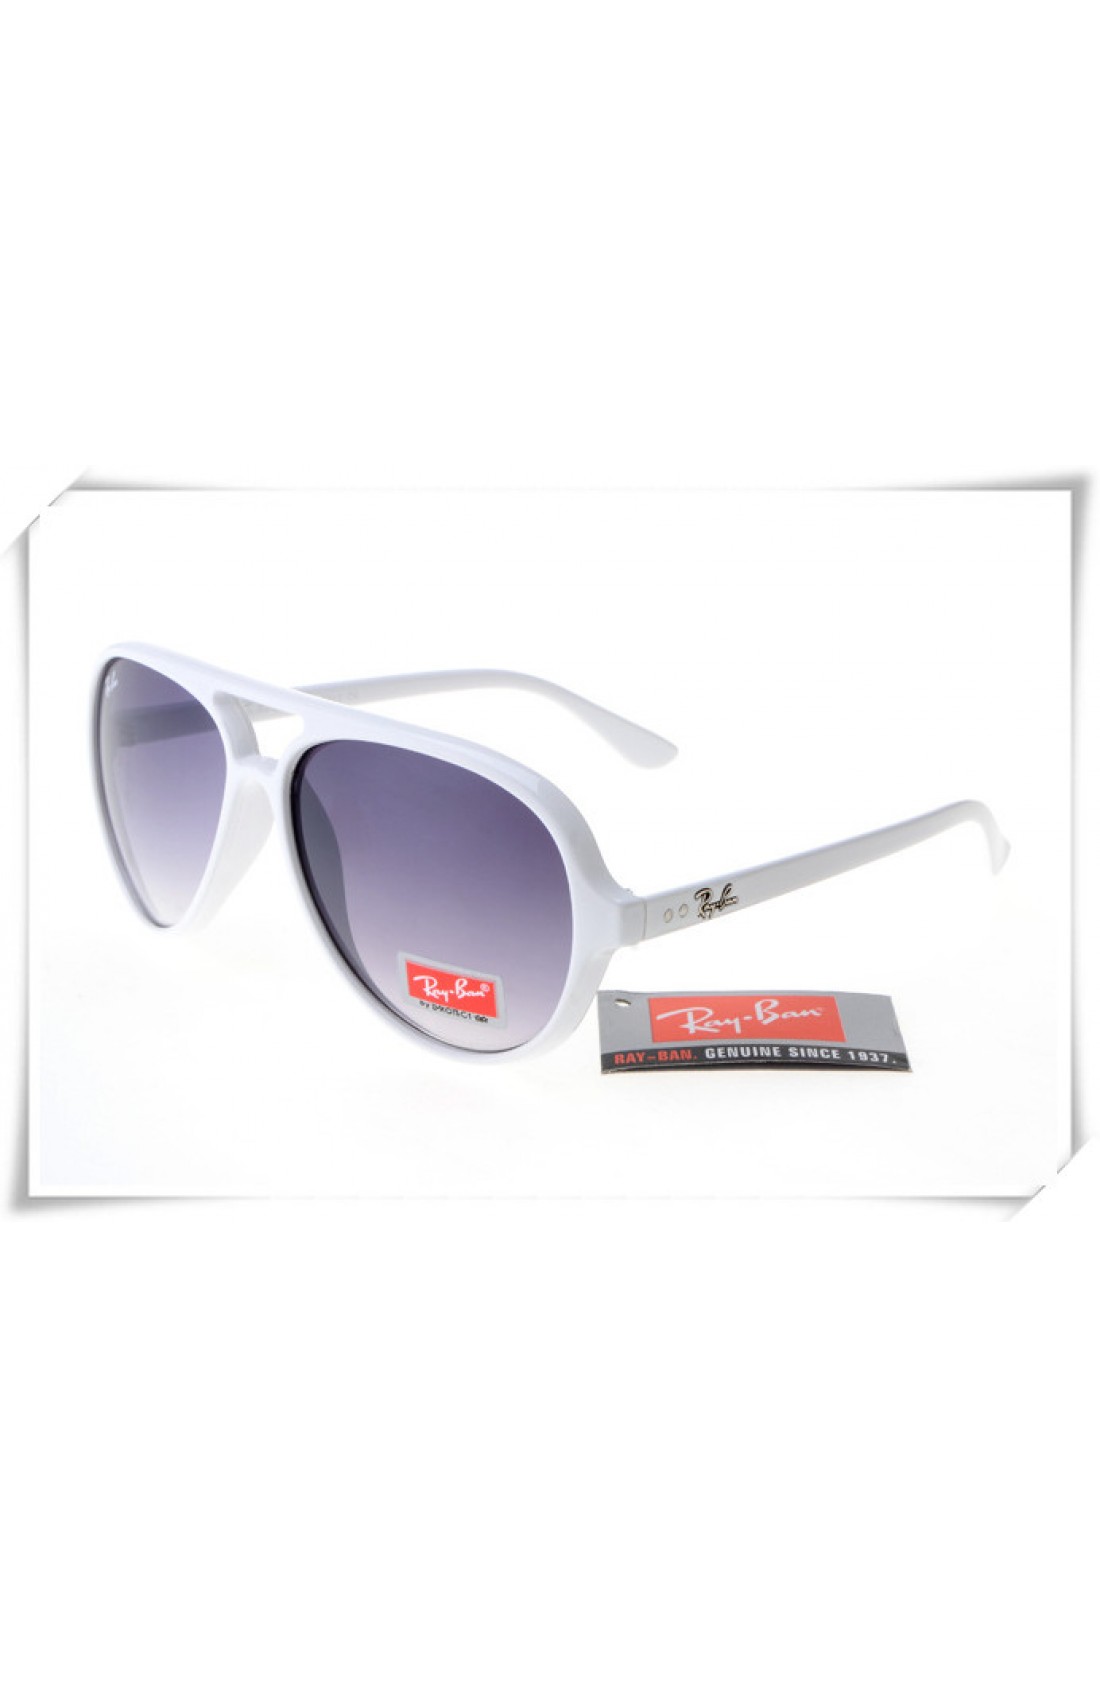 ray ban rb4125 cats 5000 sunglasses